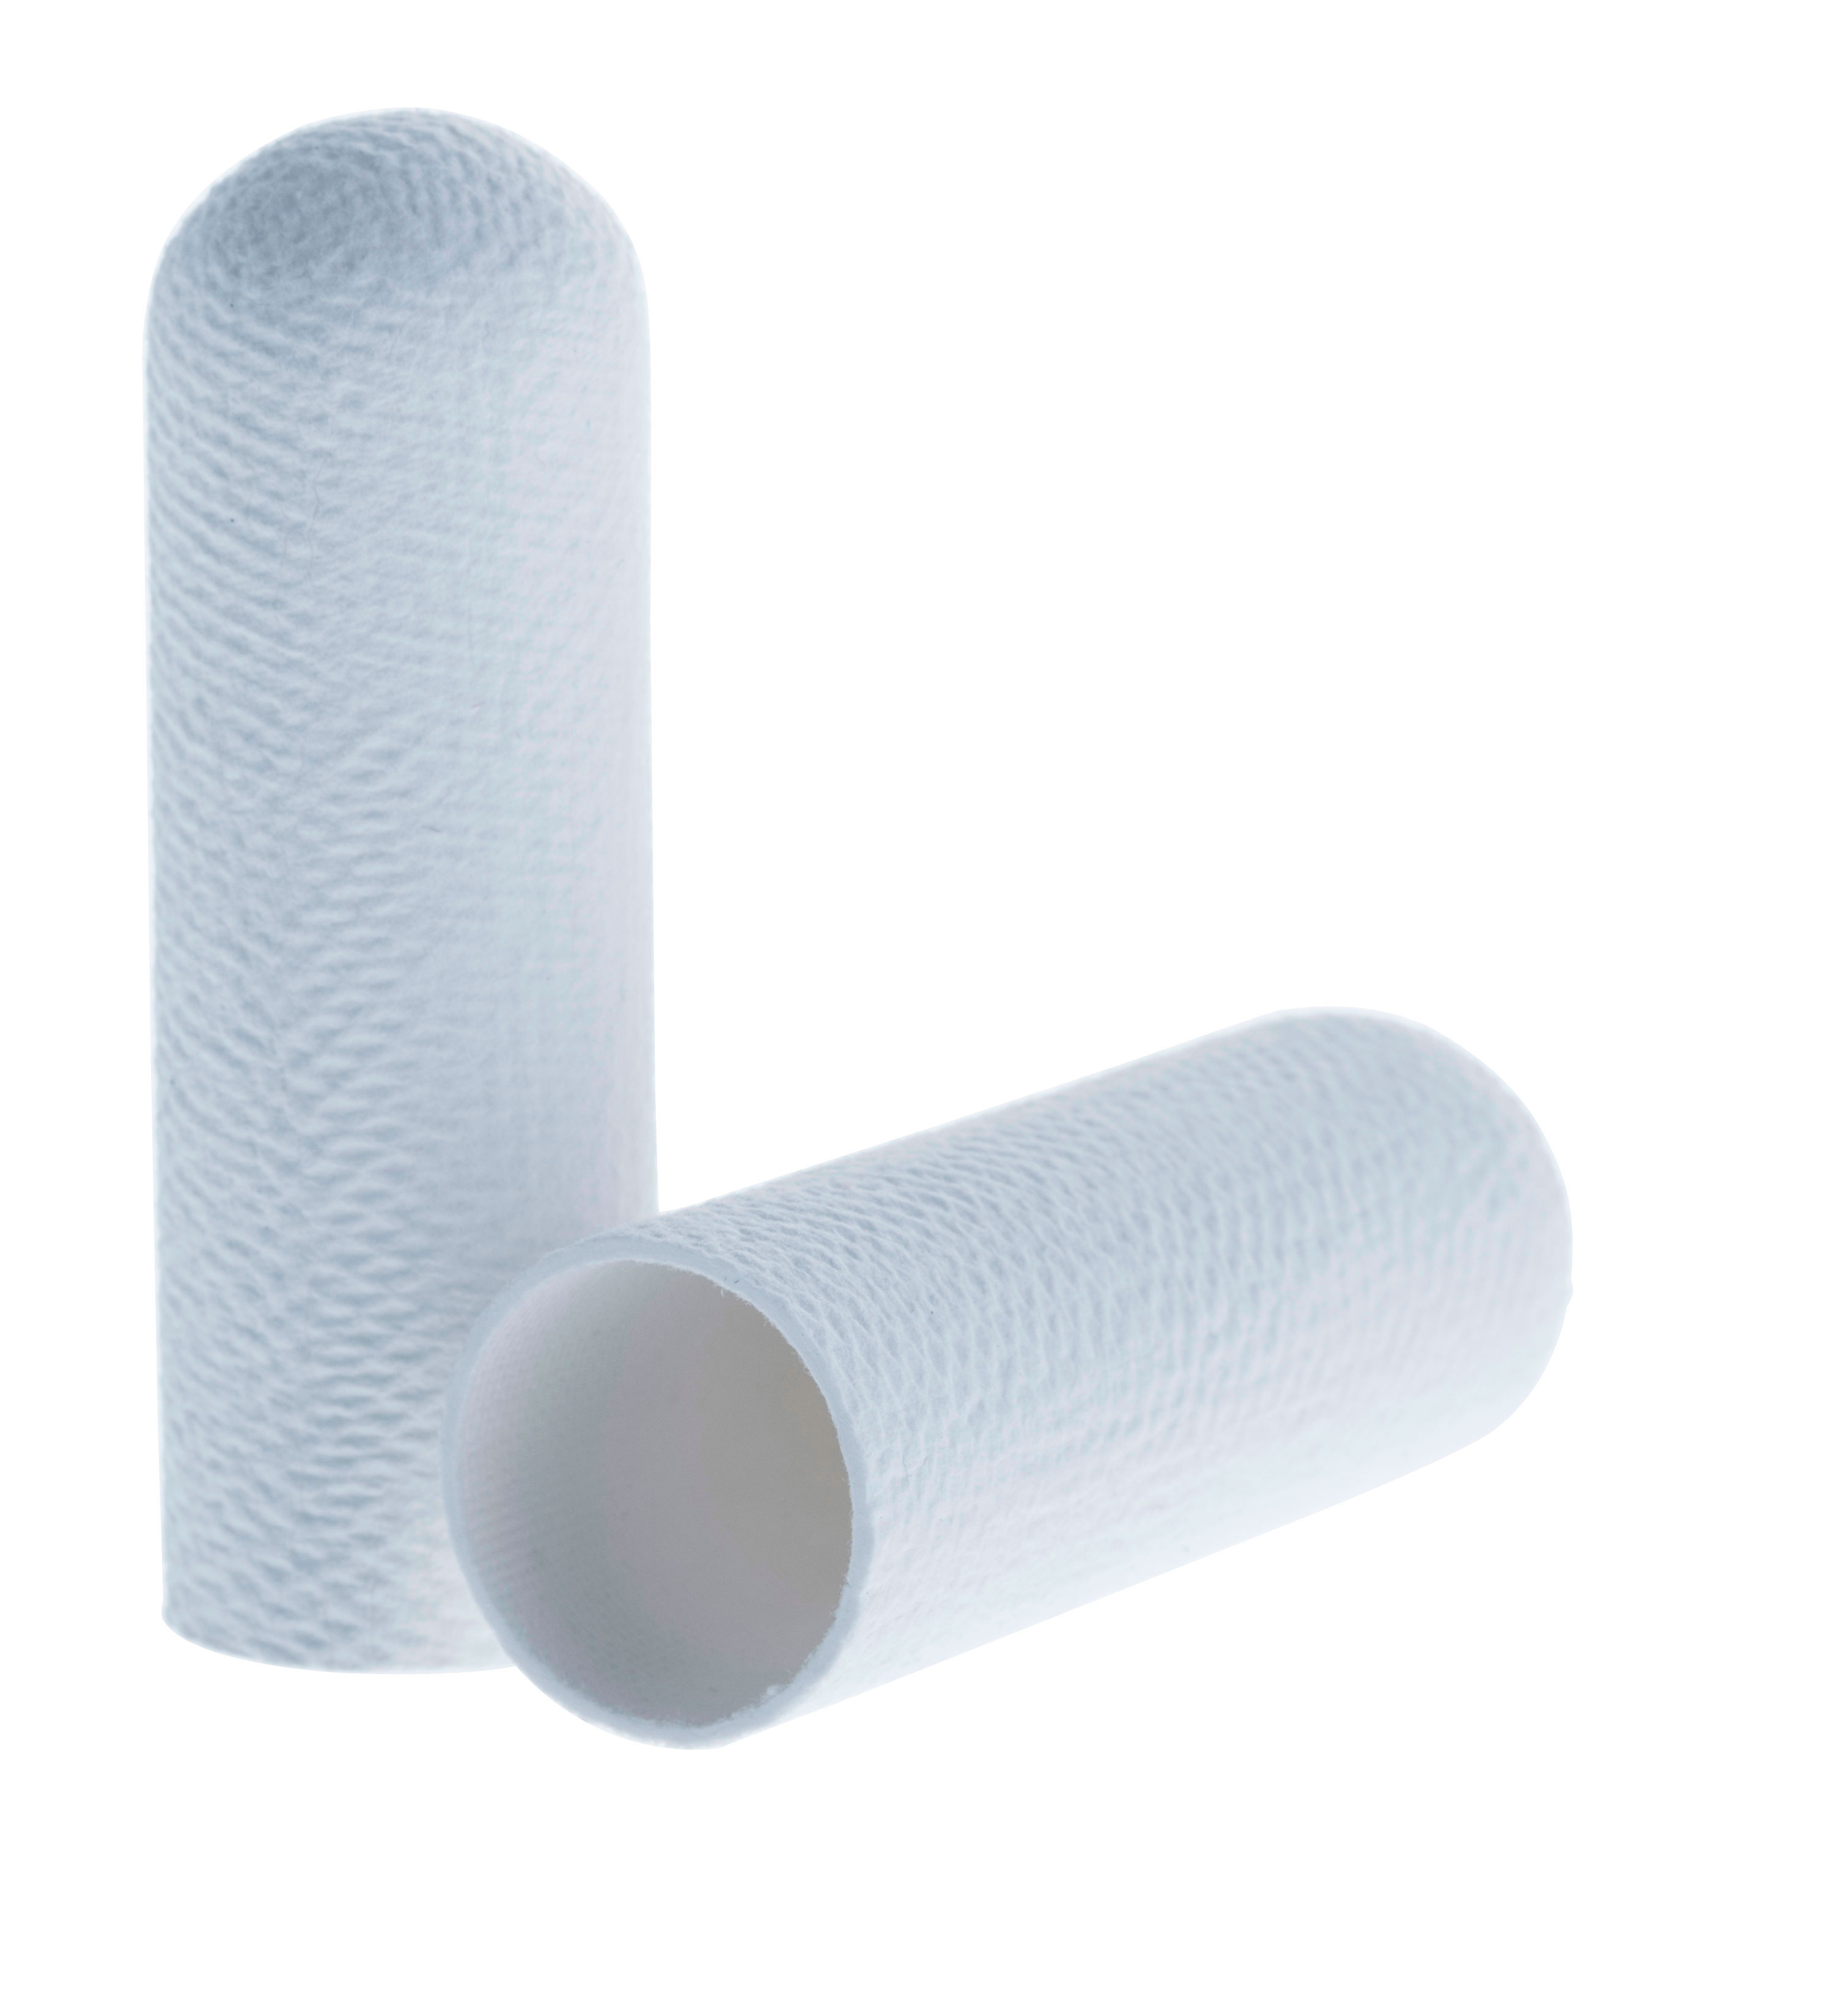 Cellulose extraction thimbles for Soxhlet extraction. SCHARLAU. Standard cellulose cartridge. Dim. Øxlength: 10x50mm. Particle retention in liquid: Nom. 8-15 microns